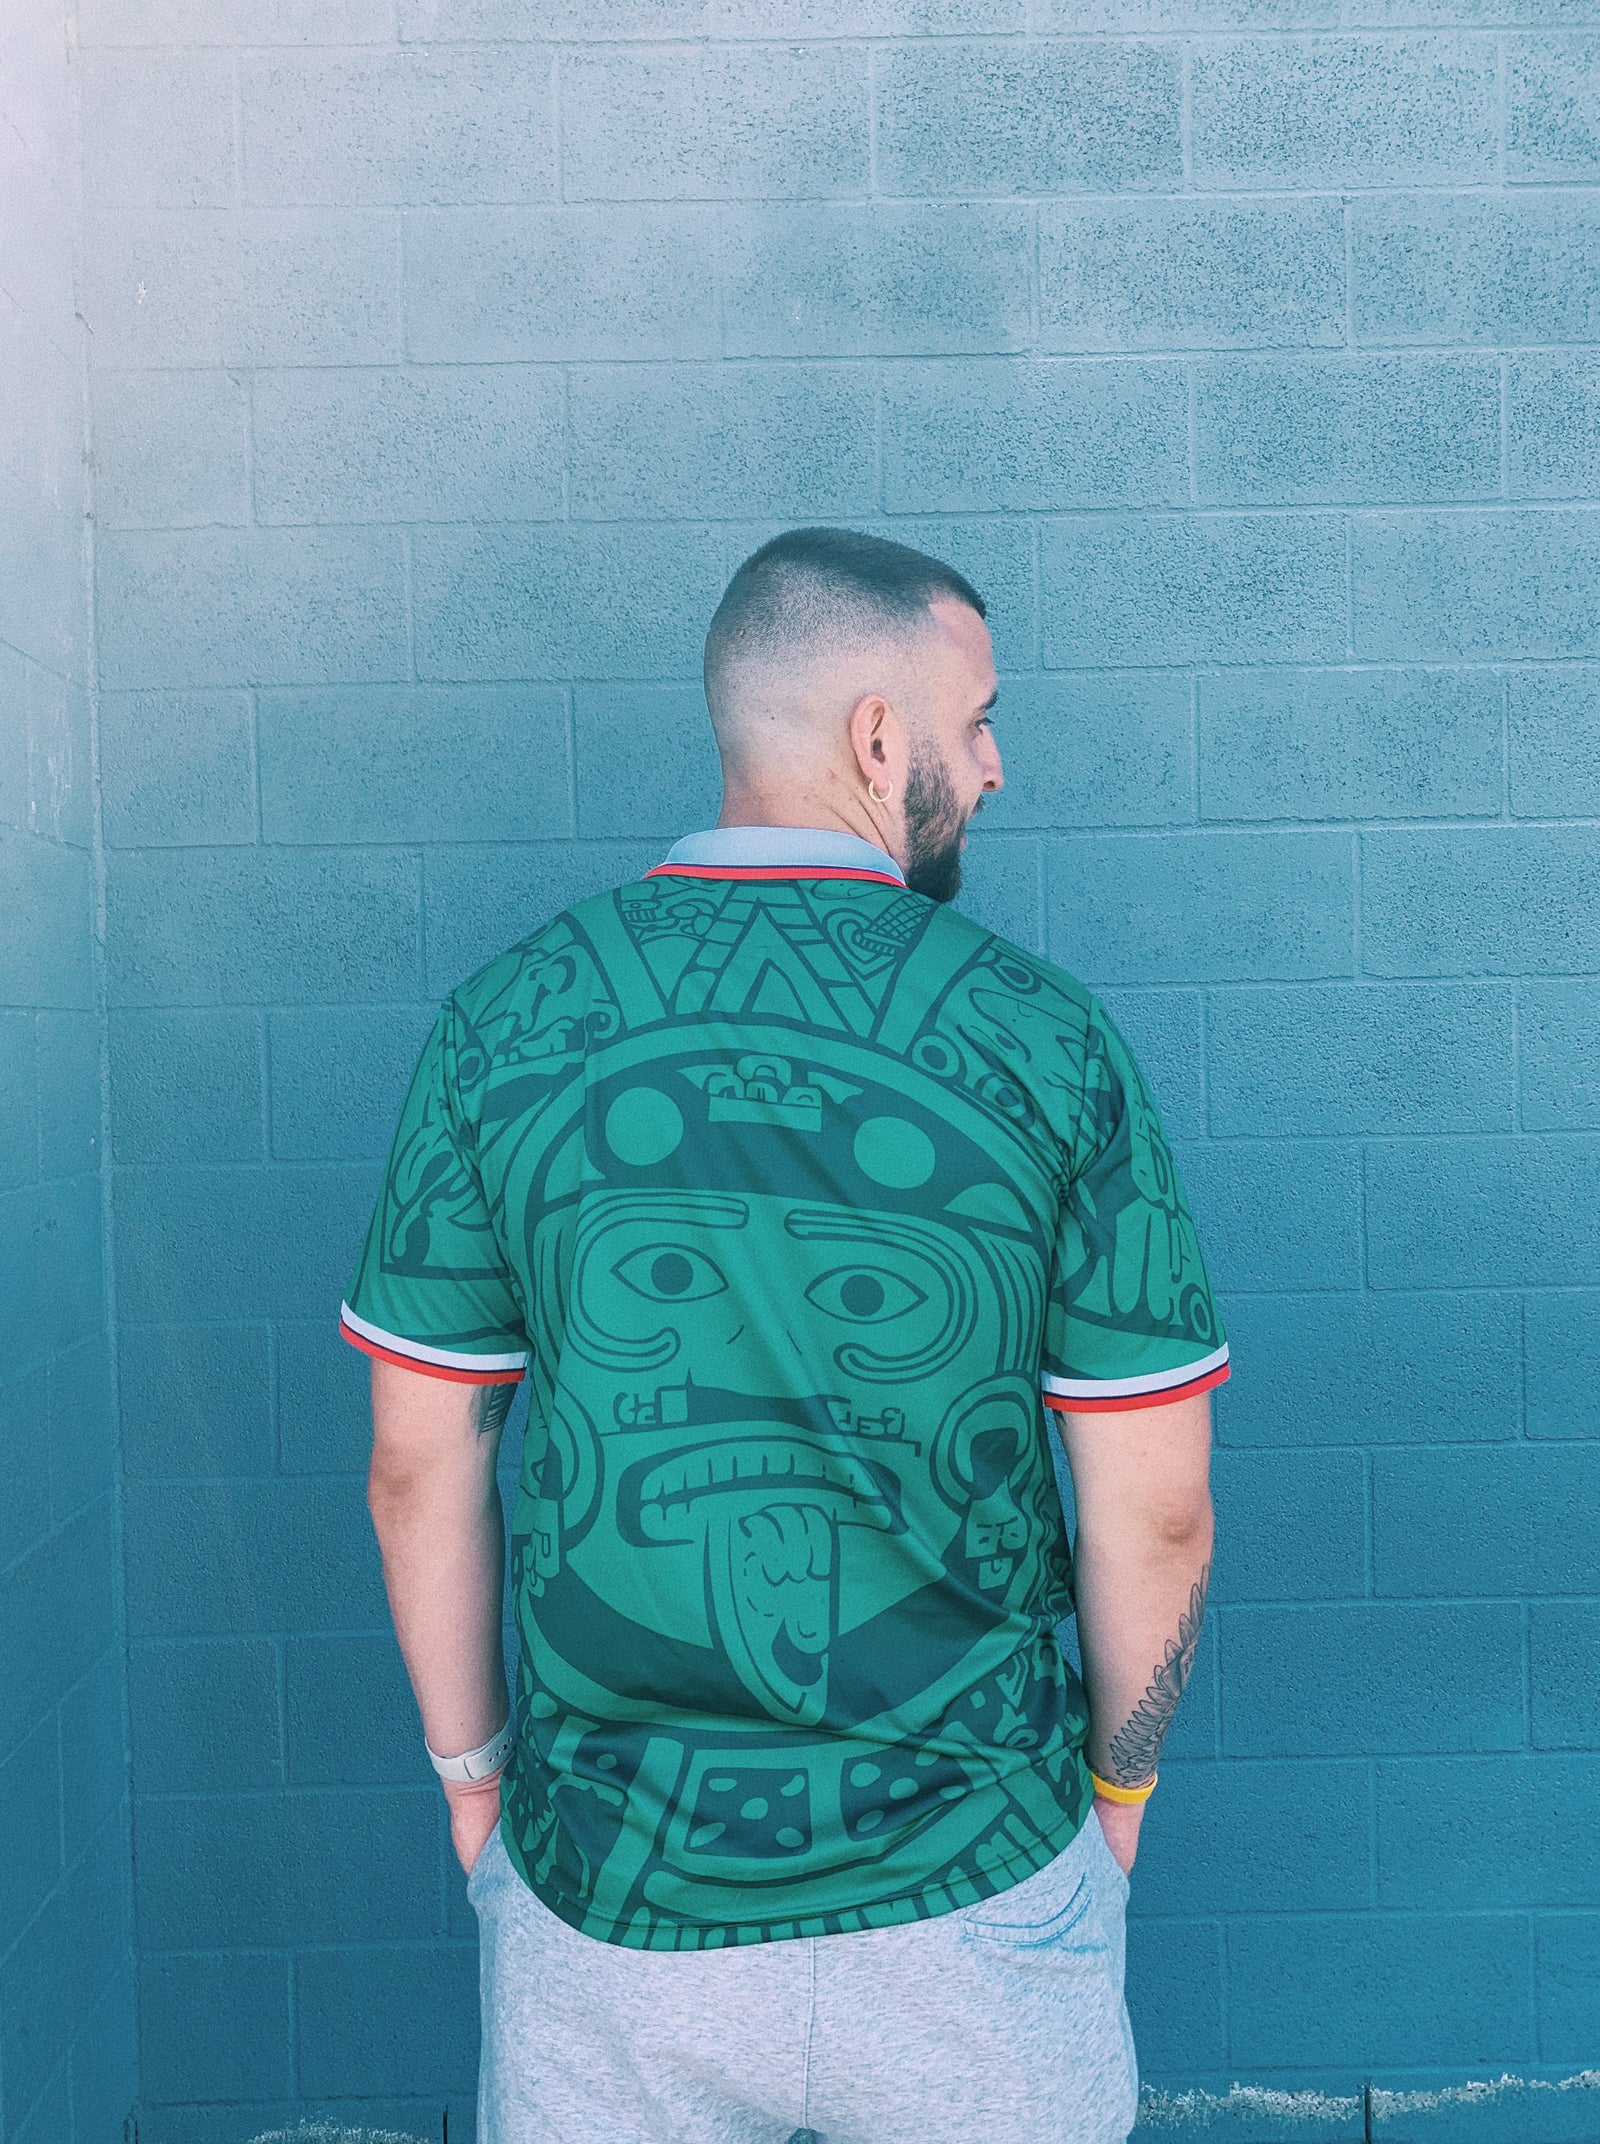 mexico world cup jersey with patches